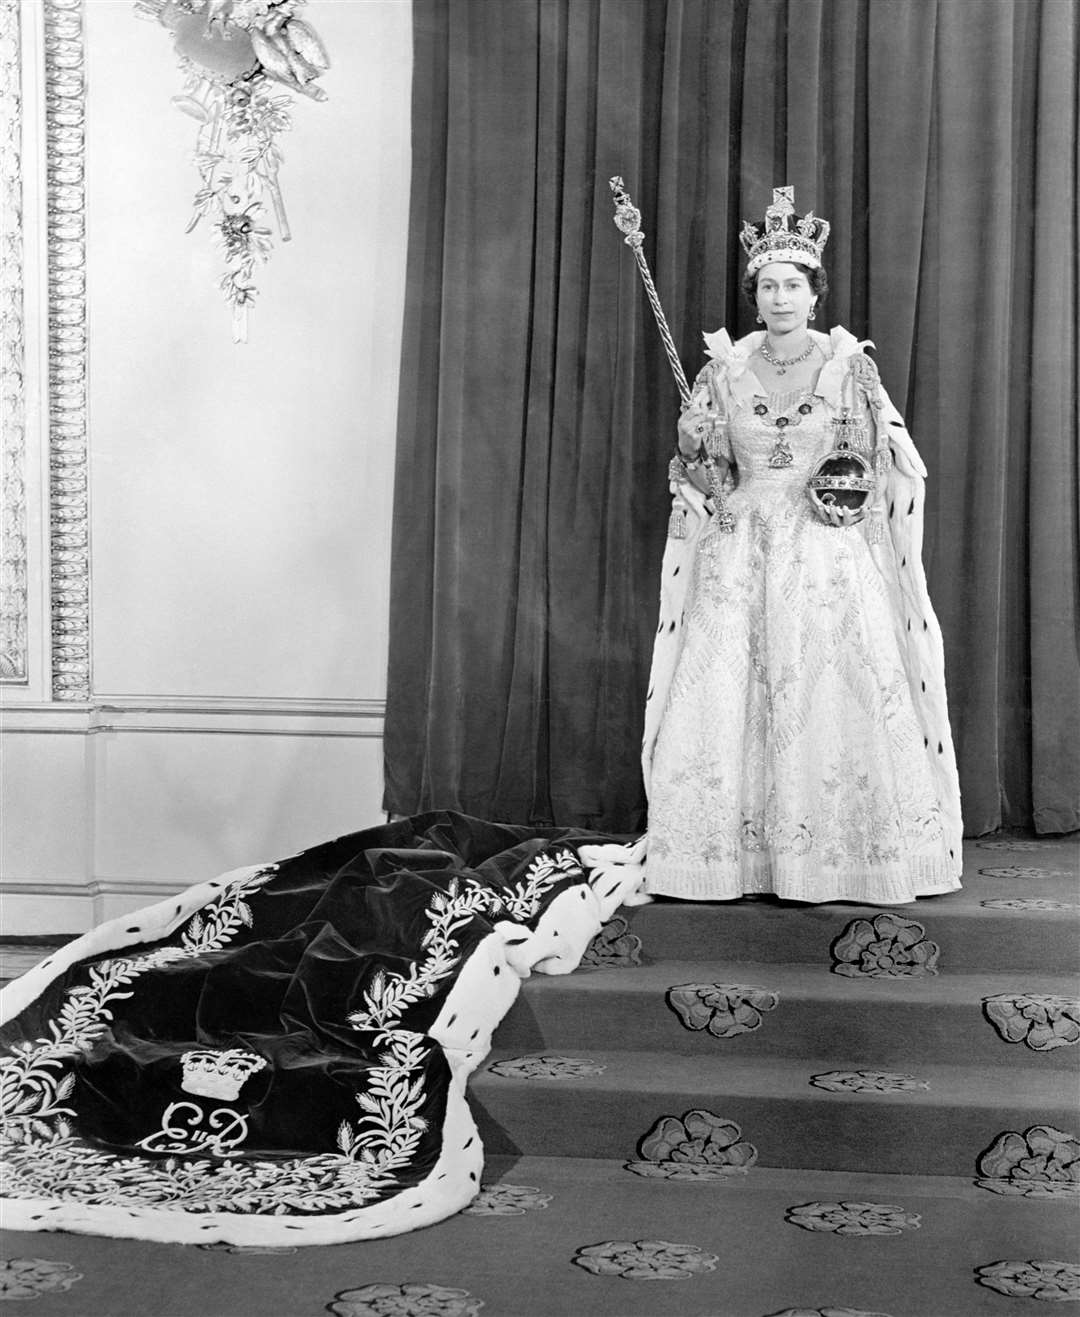 The Queen wearing the the Coronation dress and robe in the Throne Room at Buckingham Palace, after her Coronation in 1953 (PA)